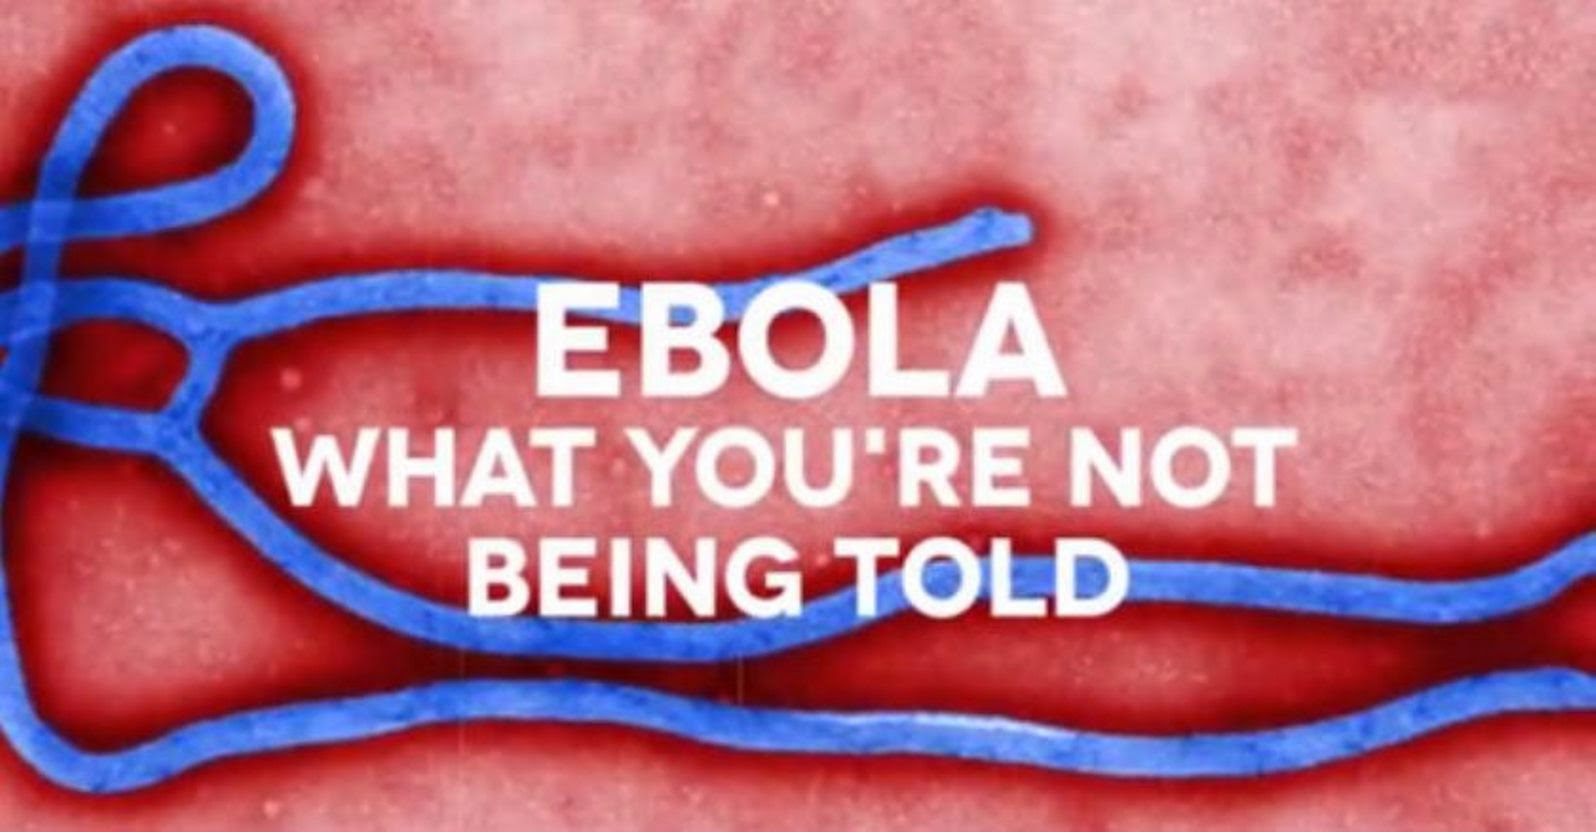 EbolaNOT-Being-Told.jpg